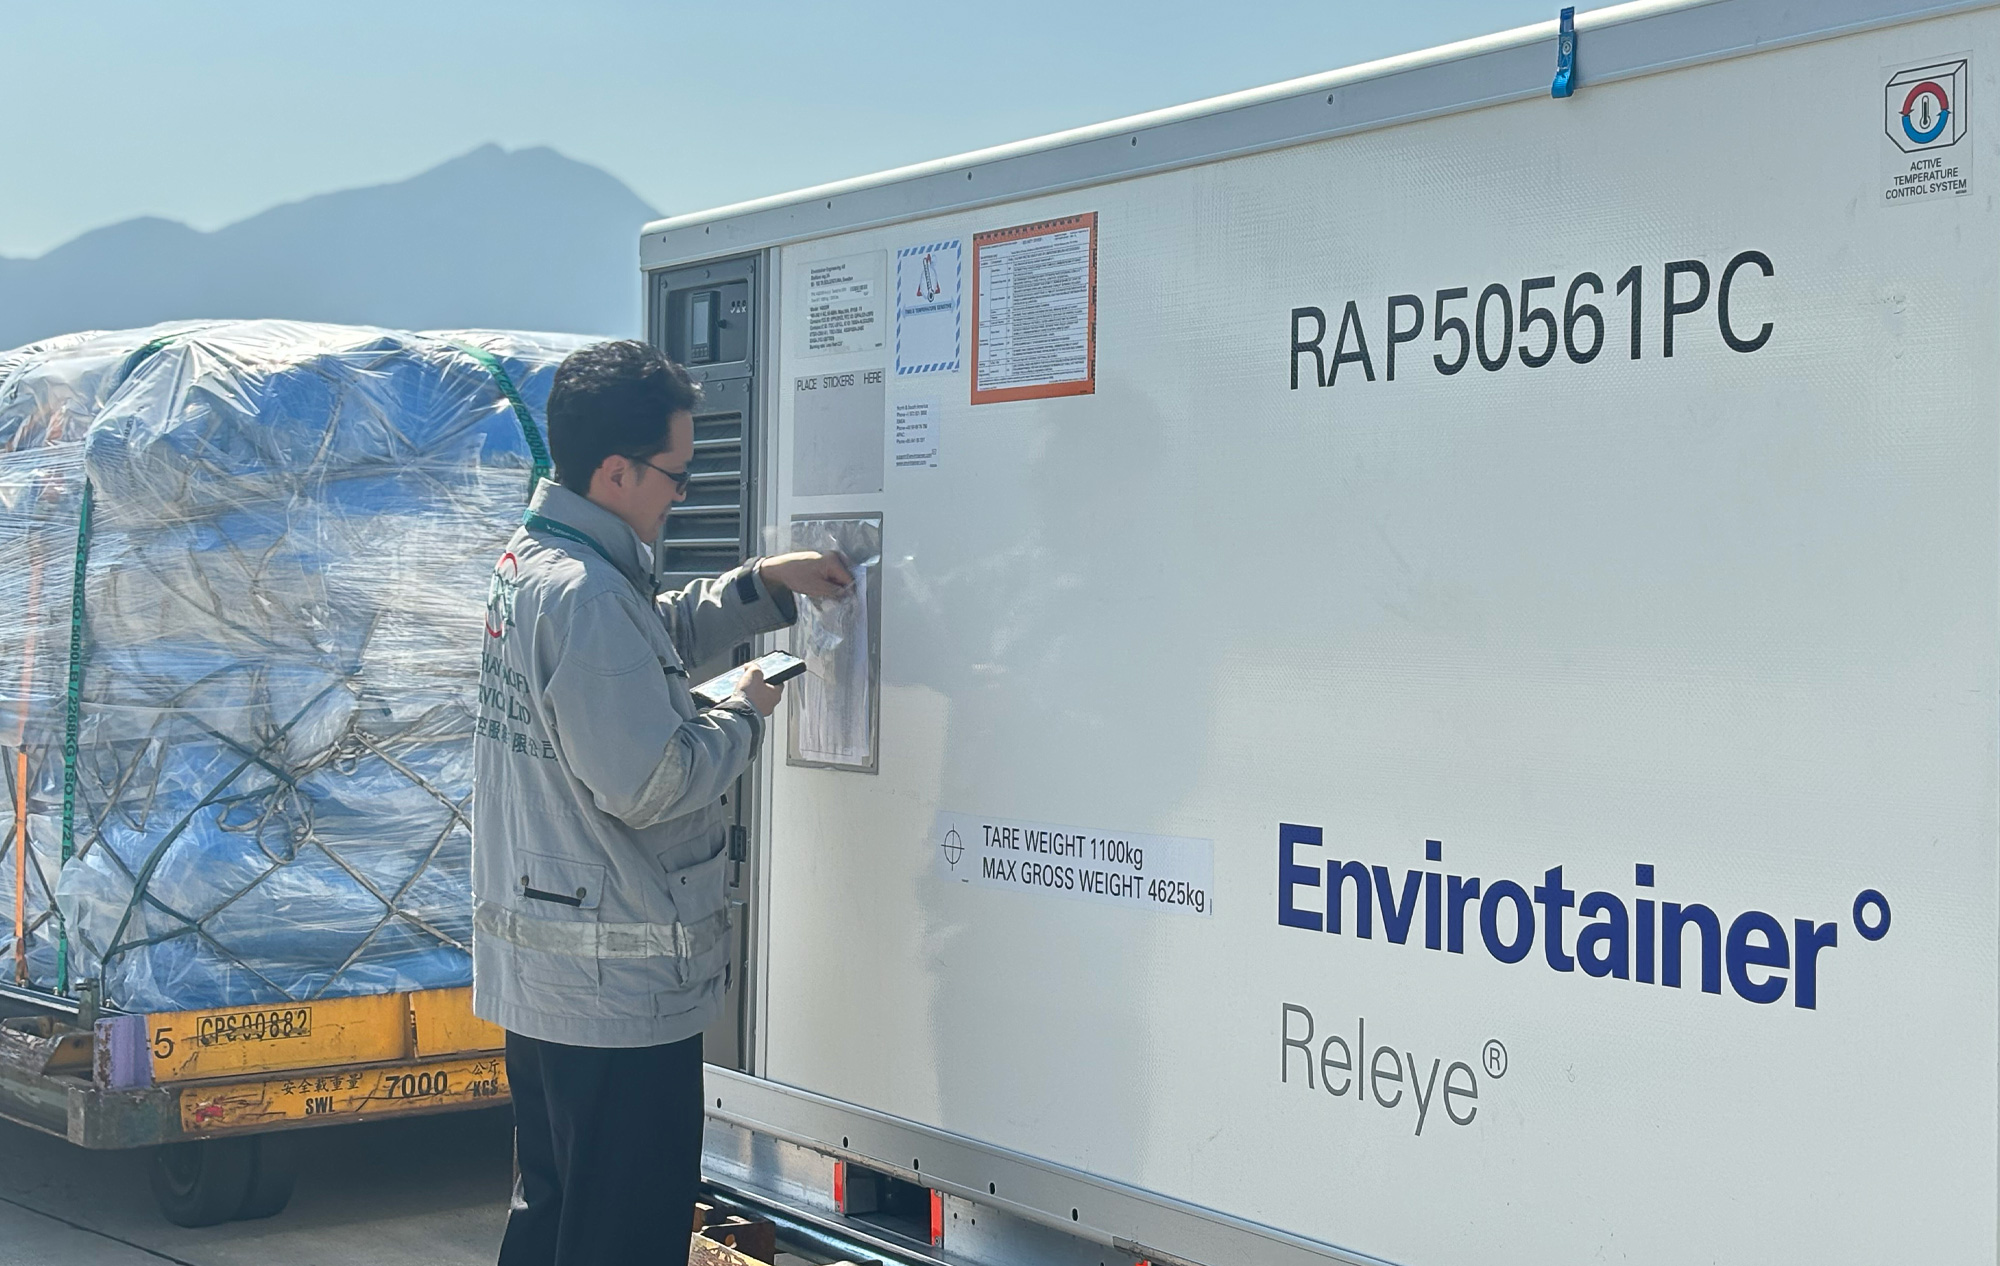 Envirotainer’s Releye® containers send data to customers over cellular networks